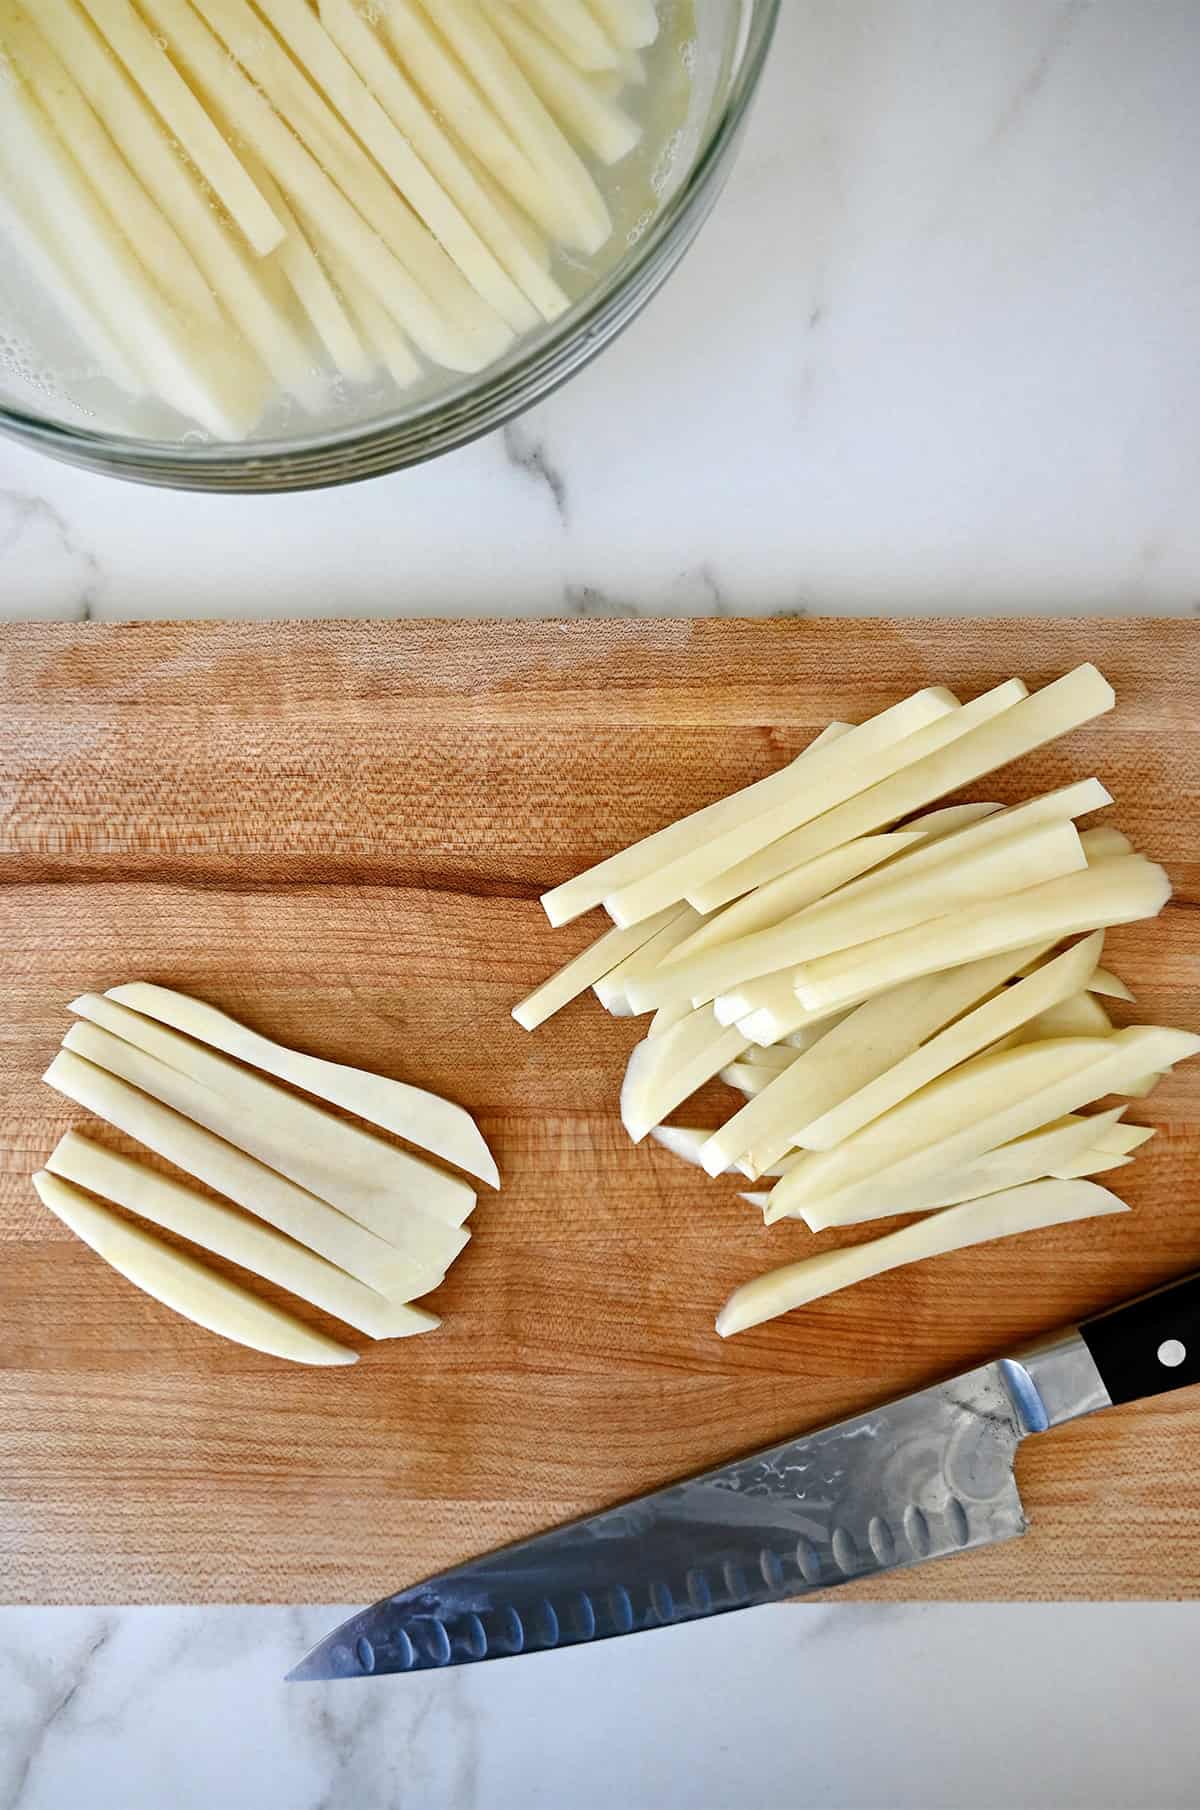 Potatoes cut into batons for French fries.